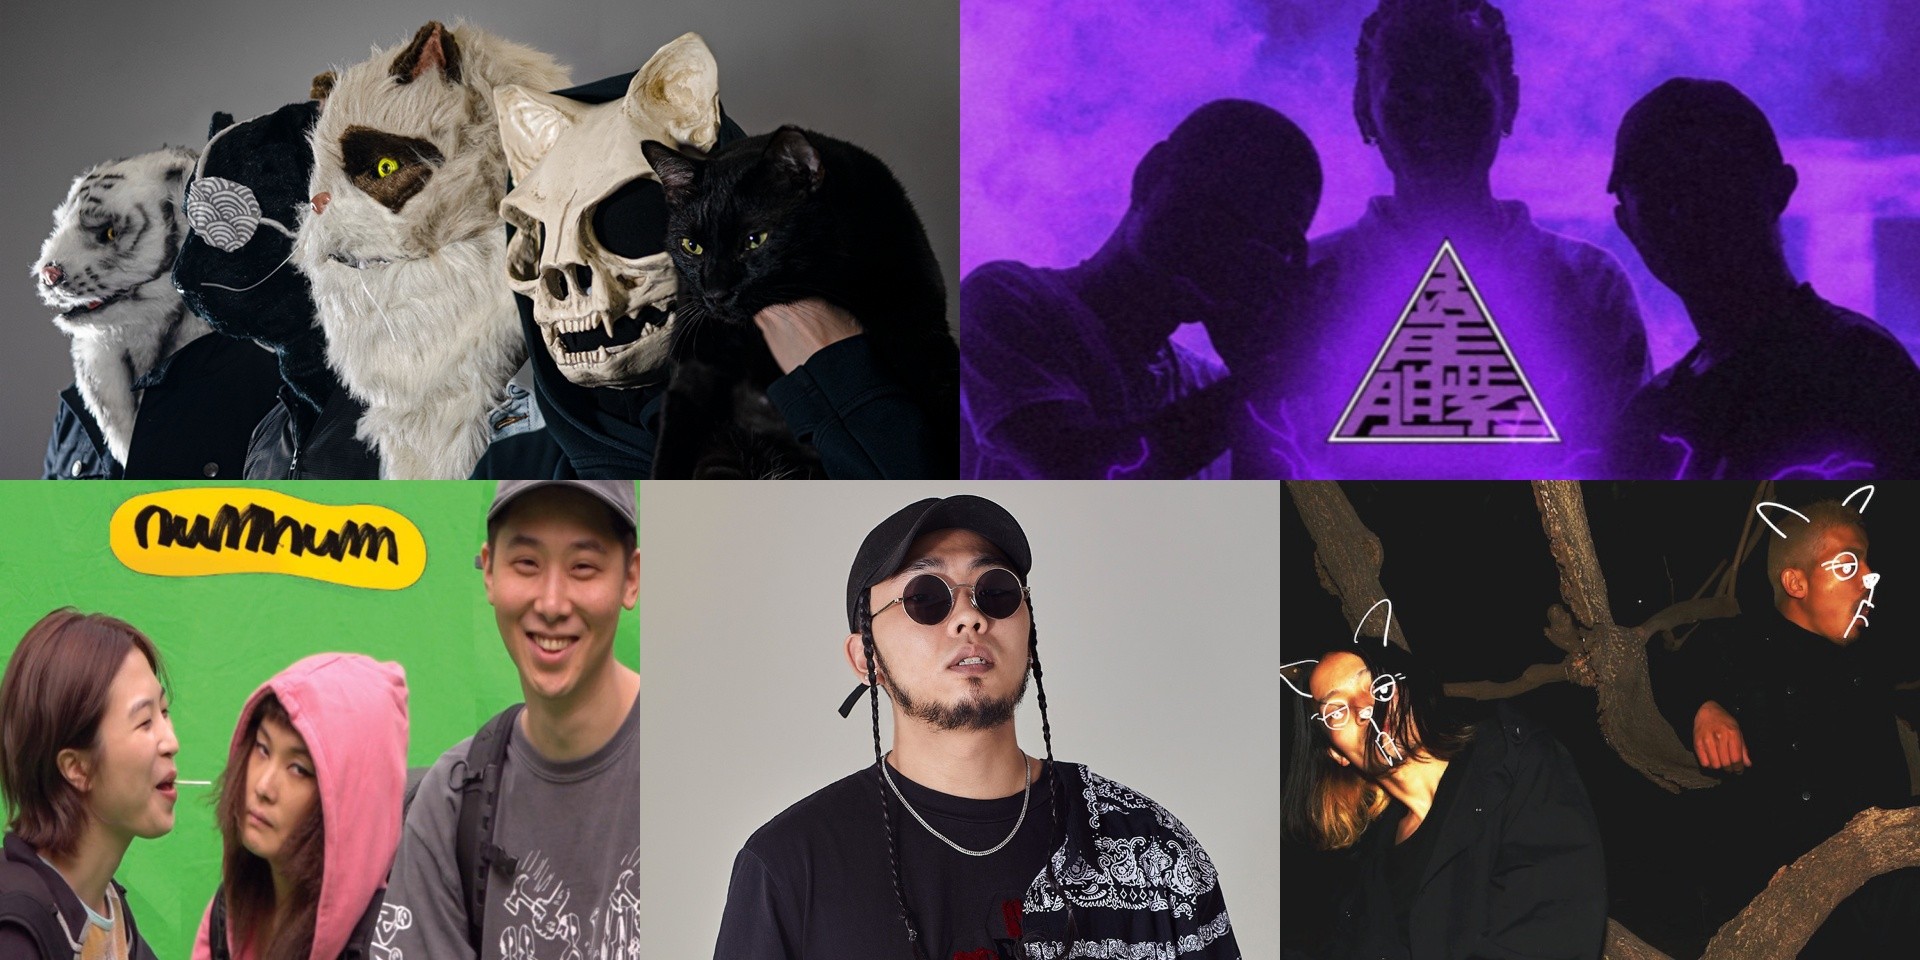 Vans Musicians Wanted Asia-Pacific top 5 finalists revealed: Ultra Mega Cat Attack from Singapore and regional finalists Num Num, H4RDY, Niko Niko Tan Tan, and PurpleSoul